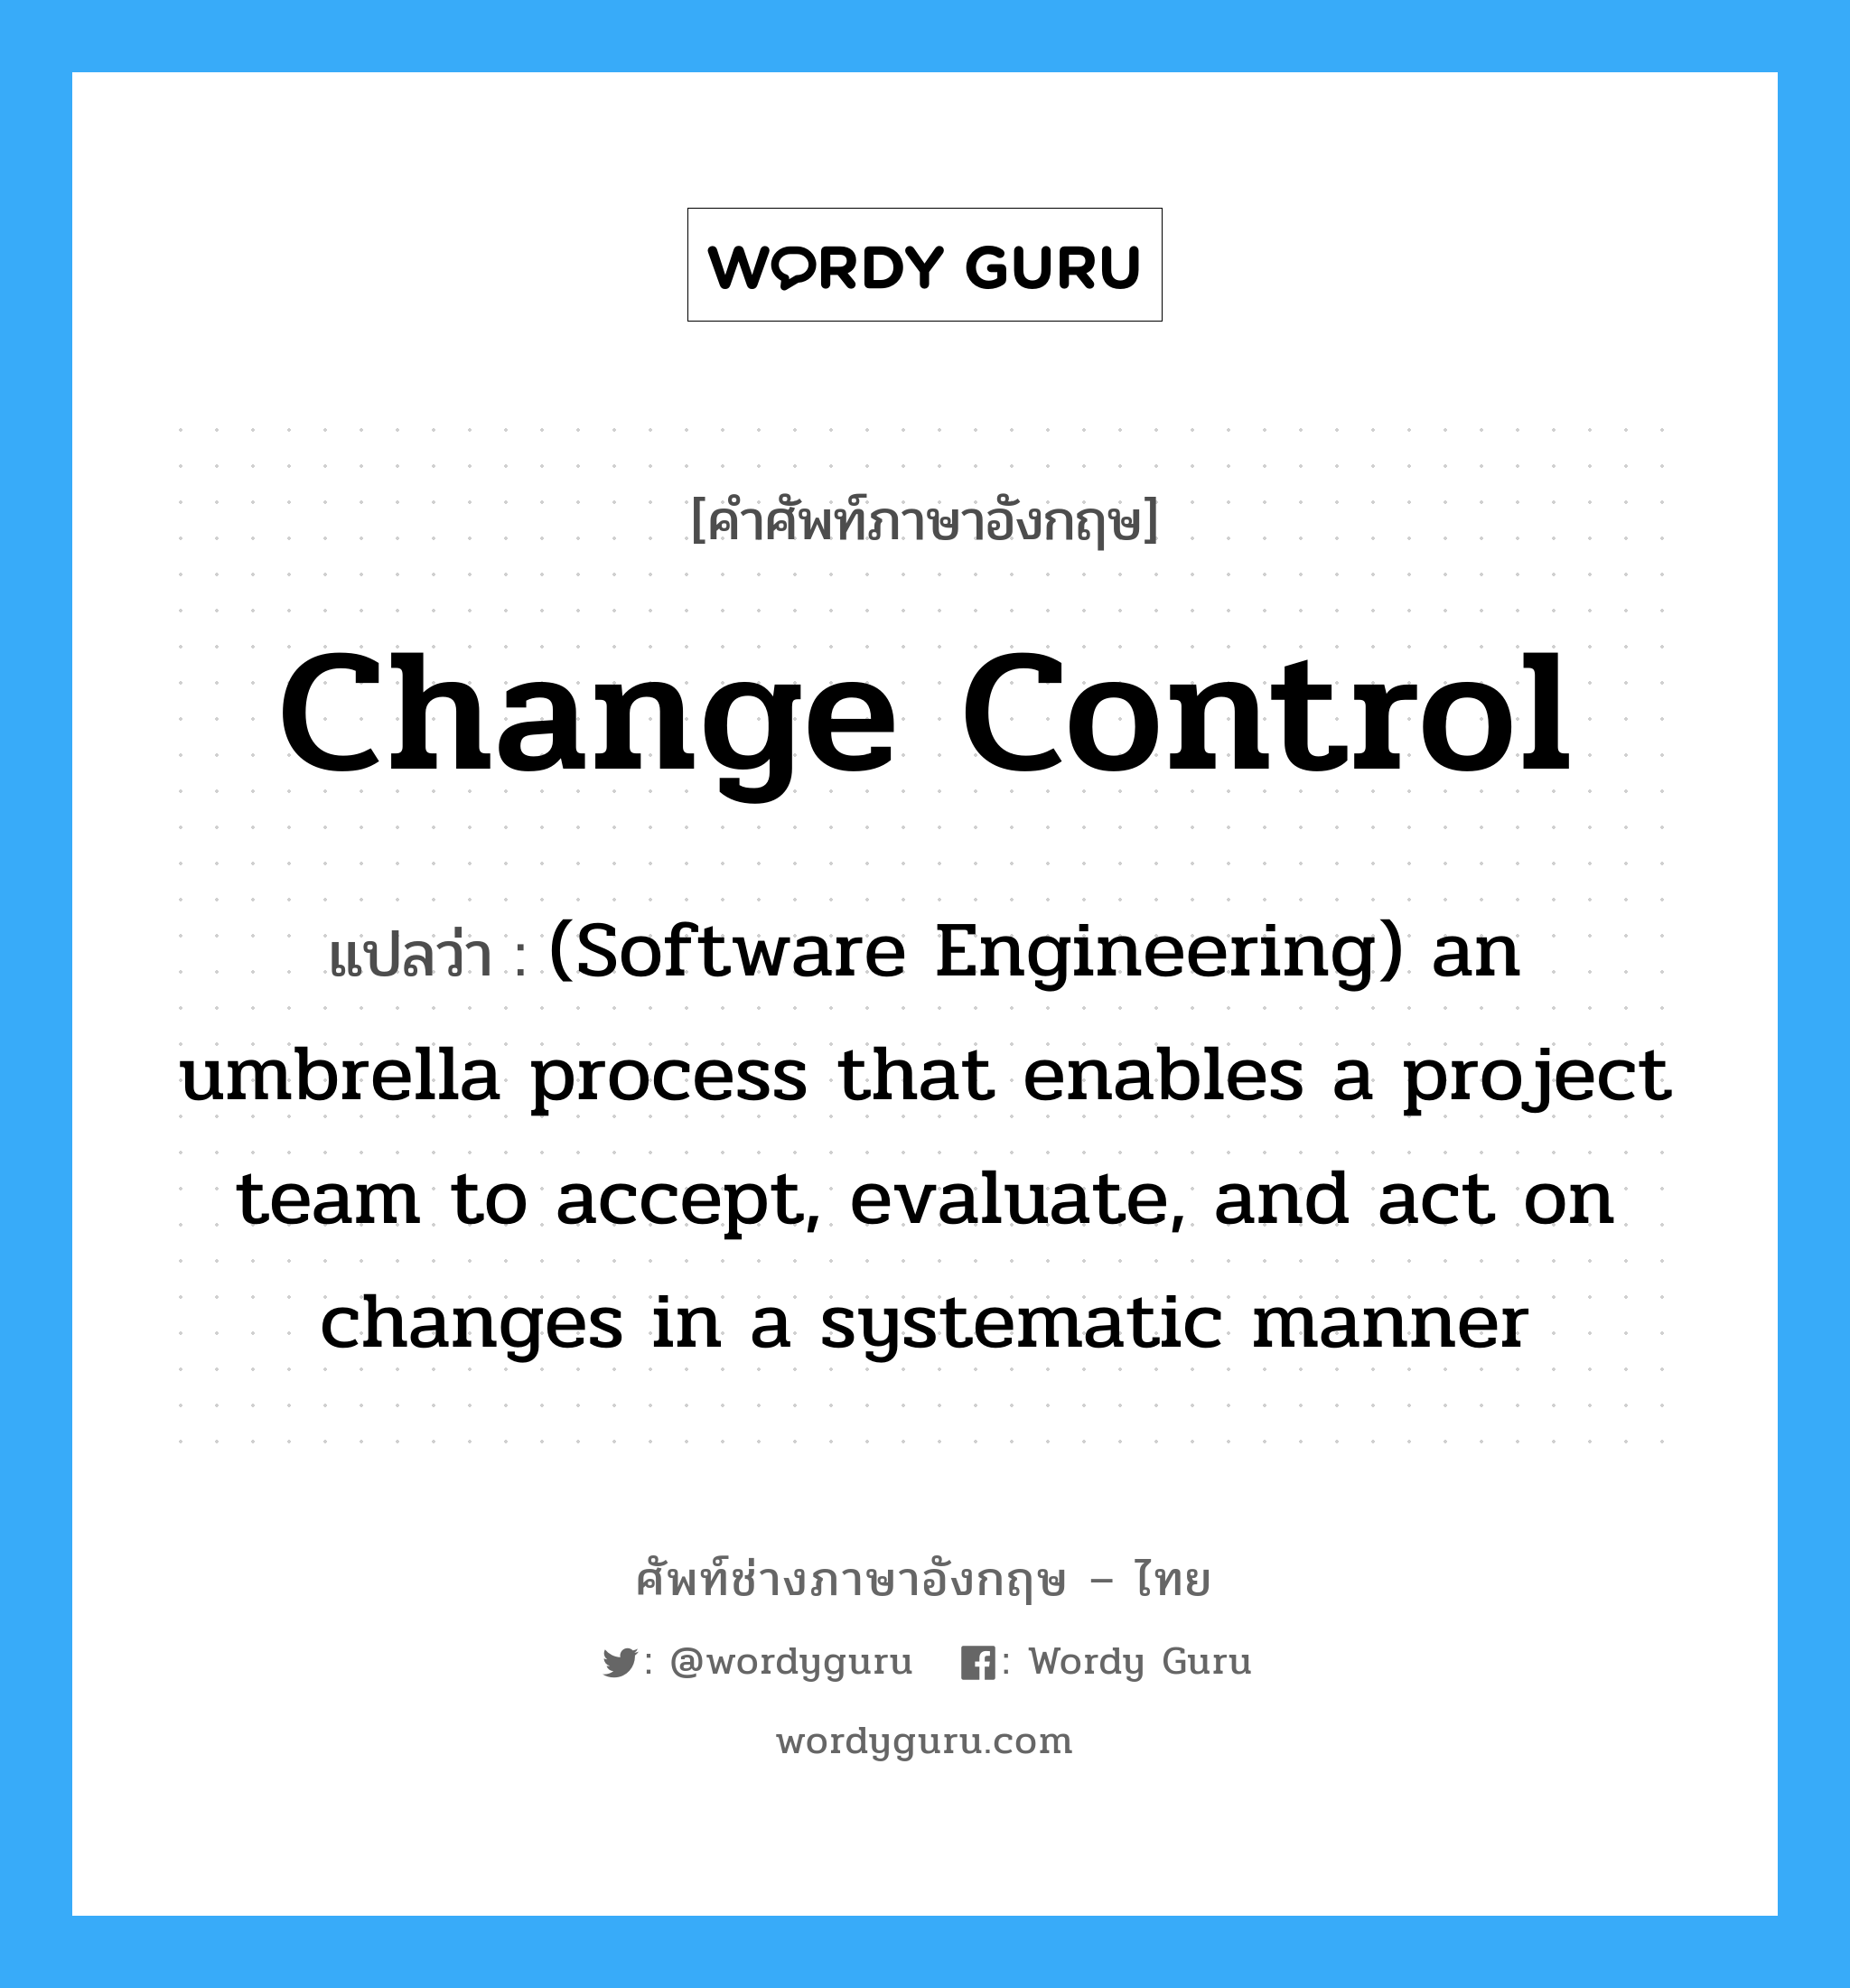 Change control แปลว่า?, คำศัพท์ช่างภาษาอังกฤษ - ไทย Change control คำศัพท์ภาษาอังกฤษ Change control แปลว่า (Software Engineering) an umbrella process that enables a project team to accept, evaluate, and act on changes in a systematic manner